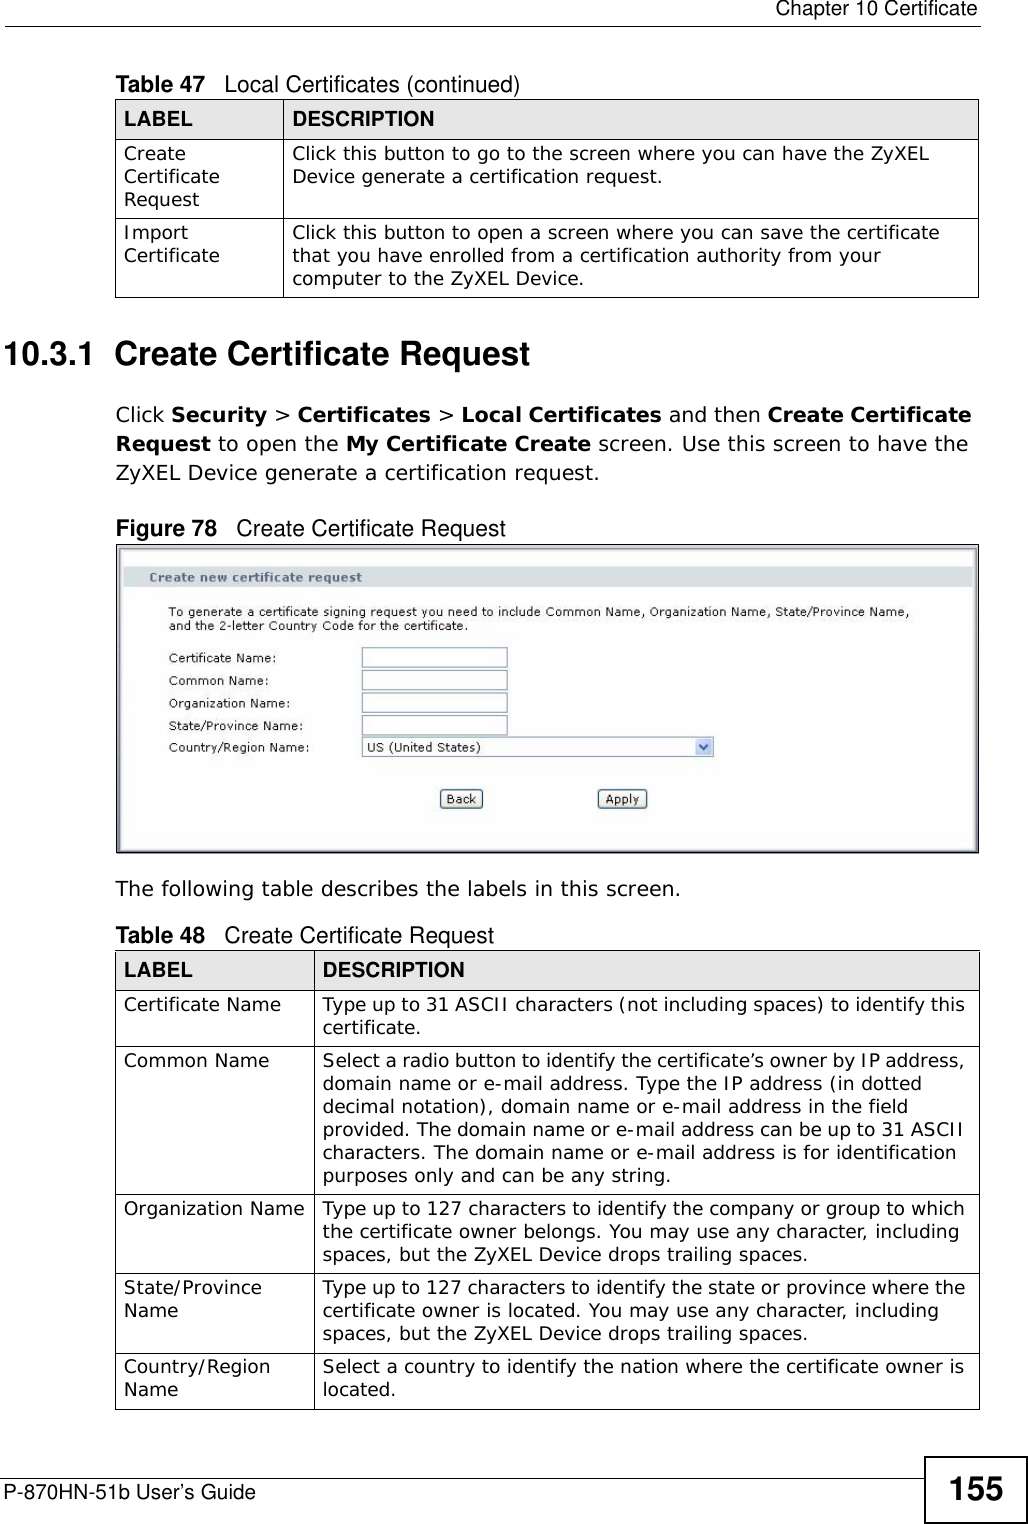  Chapter 10 CertificateP-870HN-51b User’s Guide 15510.3.1  Create Certificate Request Click Security &gt; Certificates &gt; Local Certificates and then Create Certificate Request to open the My Certificate Create screen. Use this screen to have the ZyXEL Device generate a certification request.Figure 78   Create Certificate RequestThe following table describes the labels in this screen. Create Certificate RequestClick this button to go to the screen where you can have the ZyXEL Device generate a certification request.Import Certificate Click this button to open a screen where you can save the certificate that you have enrolled from a certification authority from your computer to the ZyXEL Device.Table 47   Local Certificates (continued)LABEL DESCRIPTIONTable 48   Create Certificate RequestLABEL DESCRIPTIONCertificate Name Type up to 31 ASCII characters (not including spaces) to identify this certificate. Common Name  Select a radio button to identify the certificate’s owner by IP address, domain name or e-mail address. Type the IP address (in dotted decimal notation), domain name or e-mail address in the field provided. The domain name or e-mail address can be up to 31 ASCII characters. The domain name or e-mail address is for identification purposes only and can be any string.Organization Name Type up to 127 characters to identify the company or group to which the certificate owner belongs. You may use any character, including spaces, but the ZyXEL Device drops trailing spaces.State/Province Name Type up to 127 characters to identify the state or province where the certificate owner is located. You may use any character, including spaces, but the ZyXEL Device drops trailing spaces.Country/Region Name Select a country to identify the nation where the certificate owner is located. 